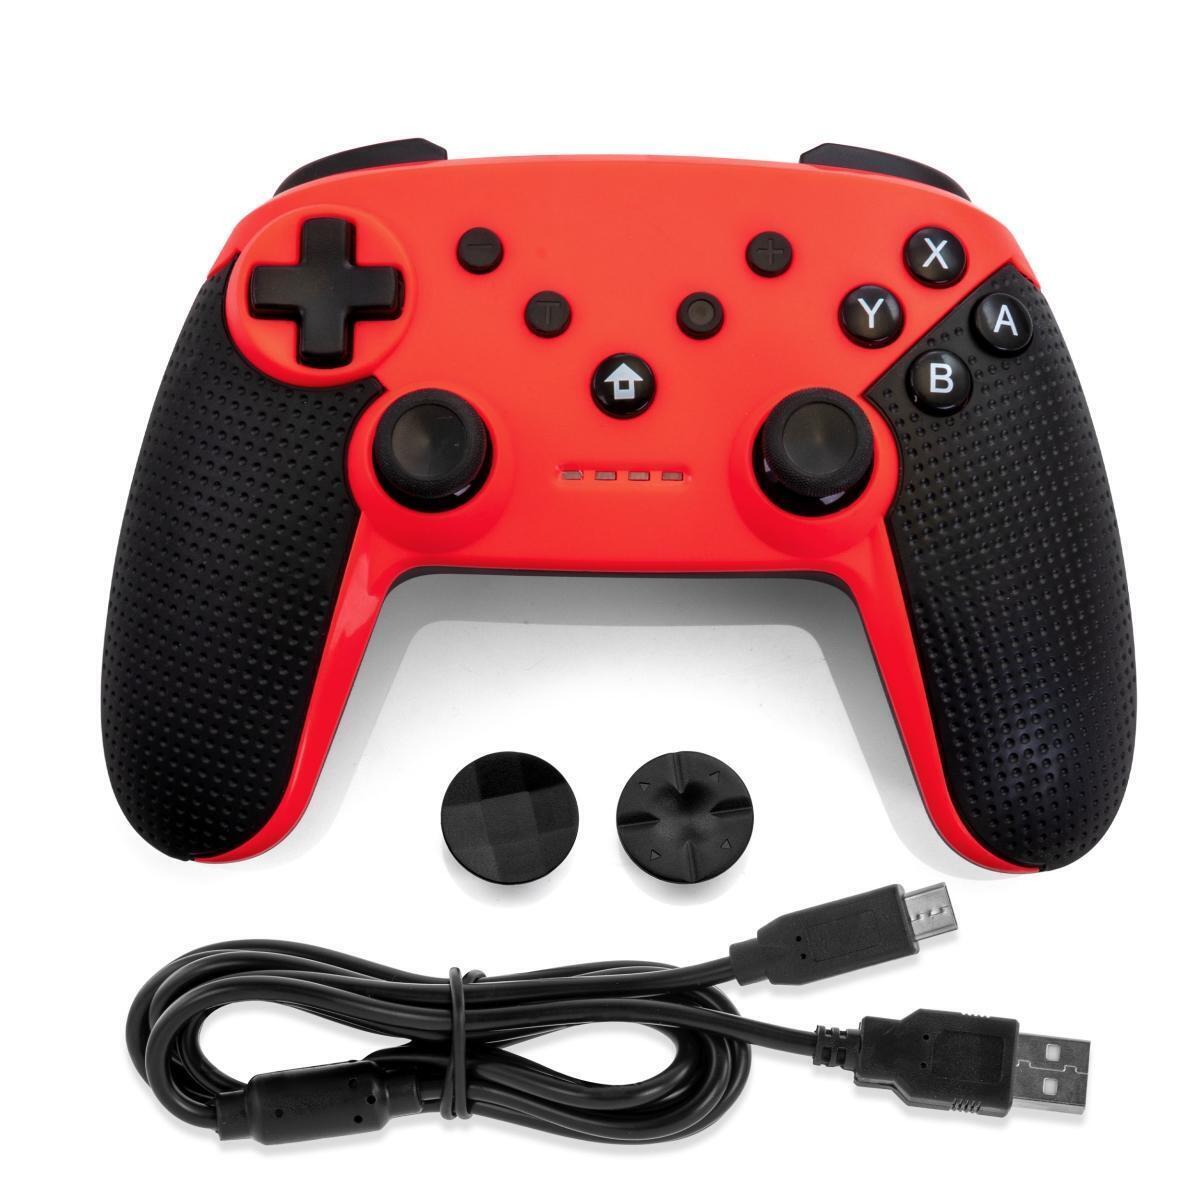 Gamefitz GF13-004RED Wireless Controller for The Nintendo Switch - Red